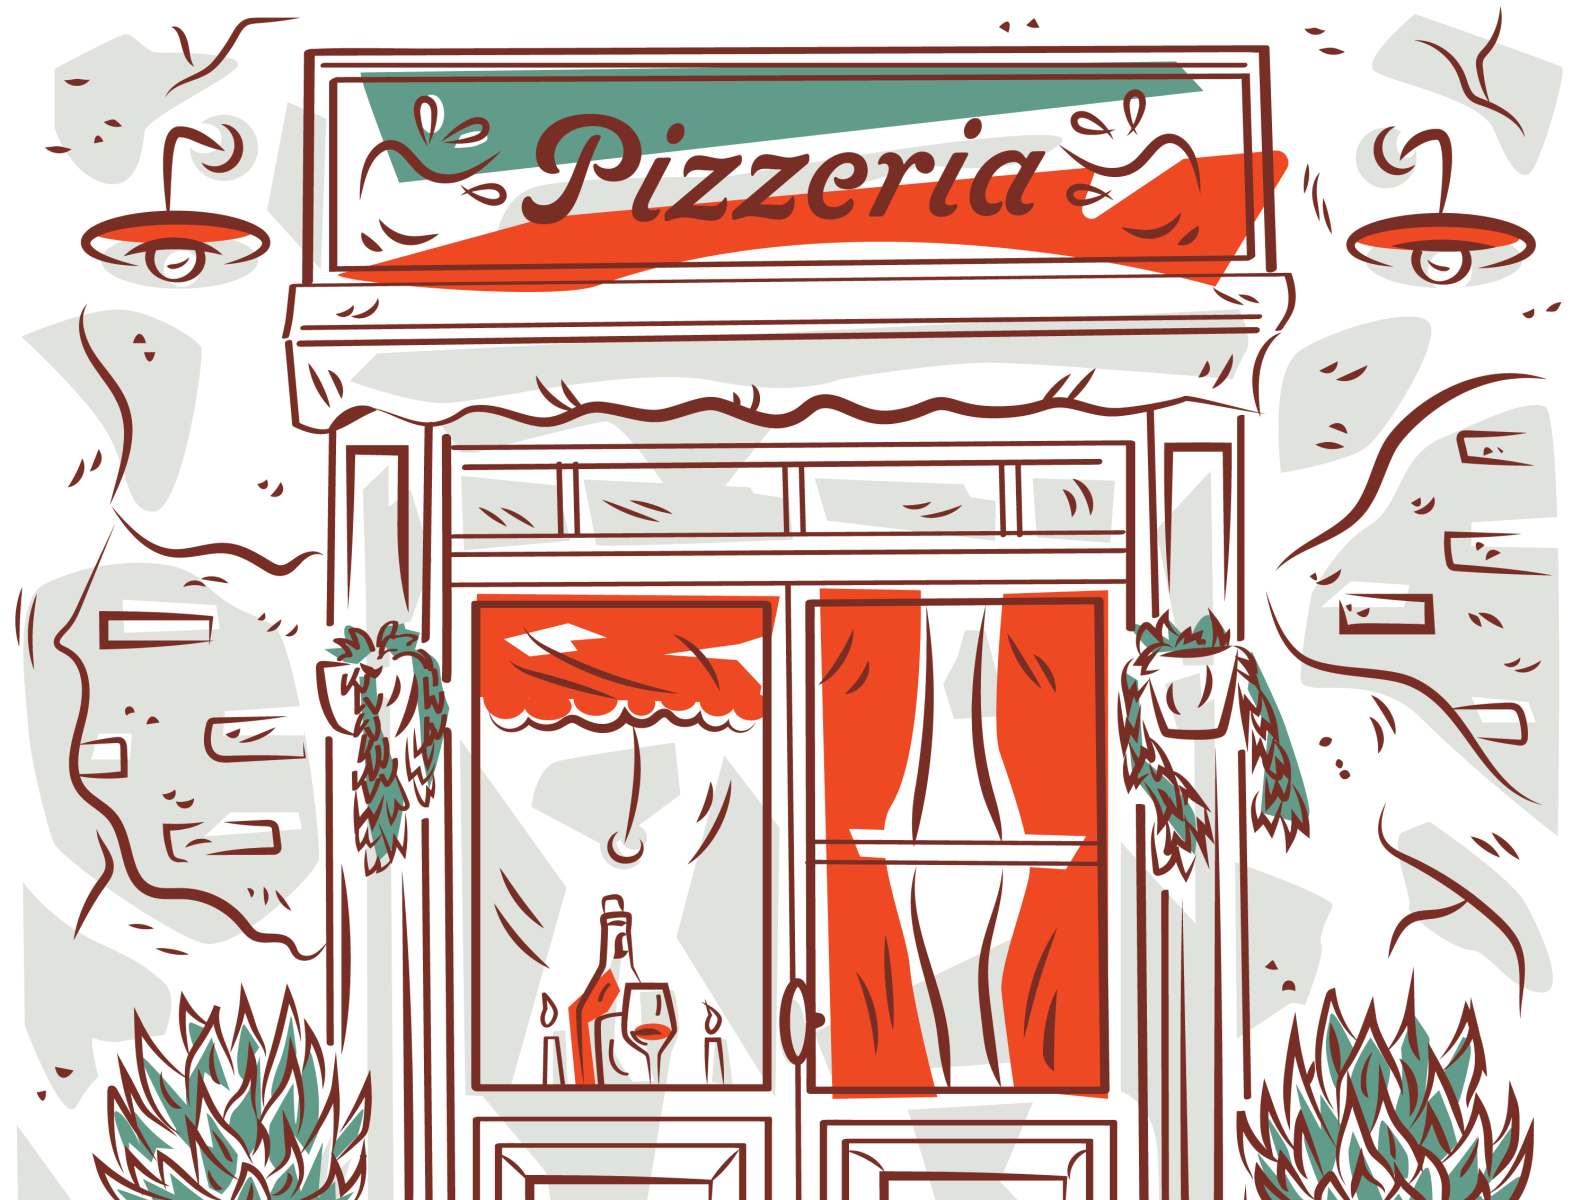 Generic Pizza Box by Richard Mullins on Dribbble